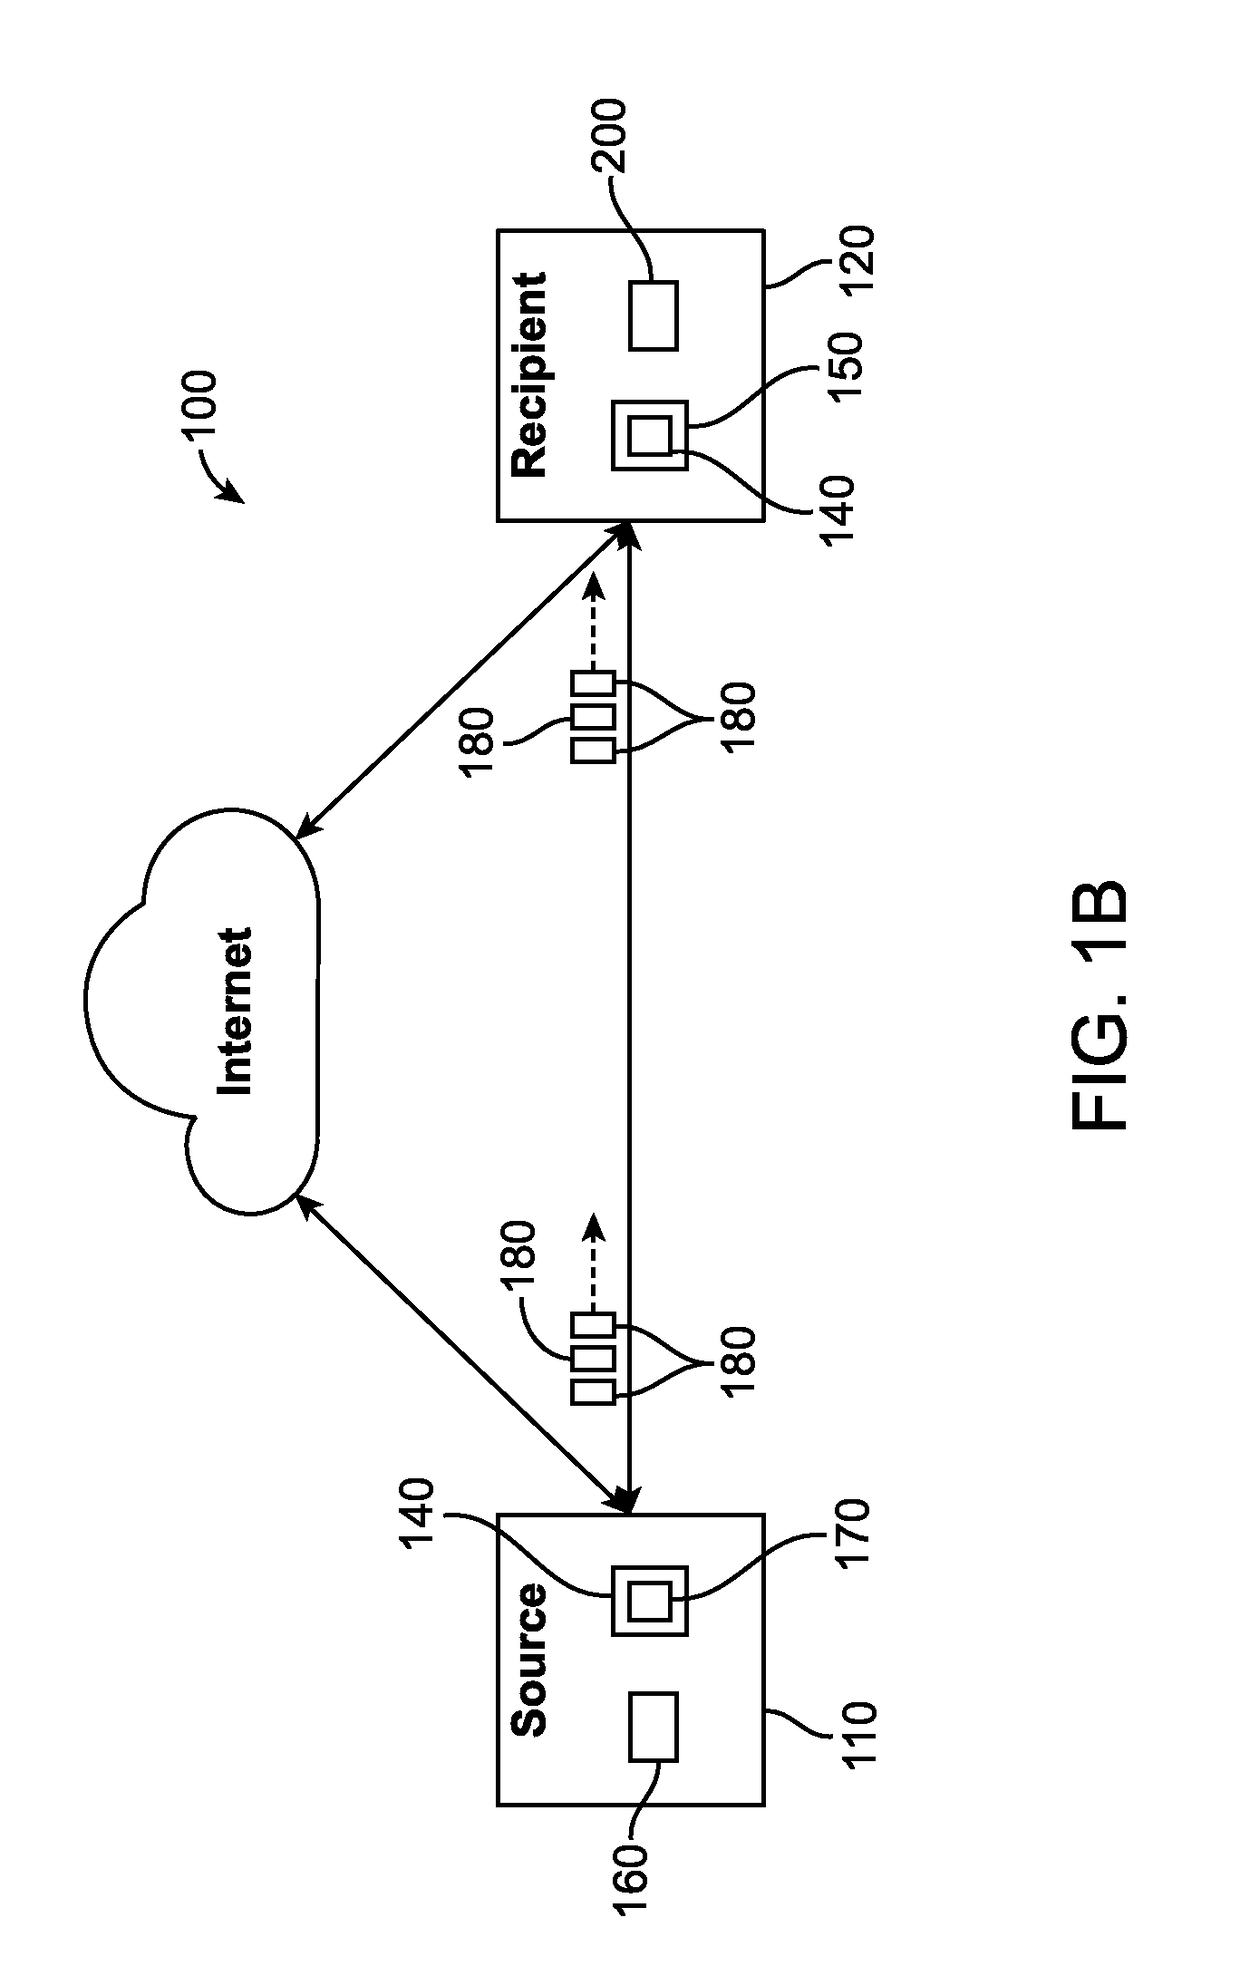 Systems and methods for security hardening of data in transit and at rest via segmentation, shuffling and multi-key encryption